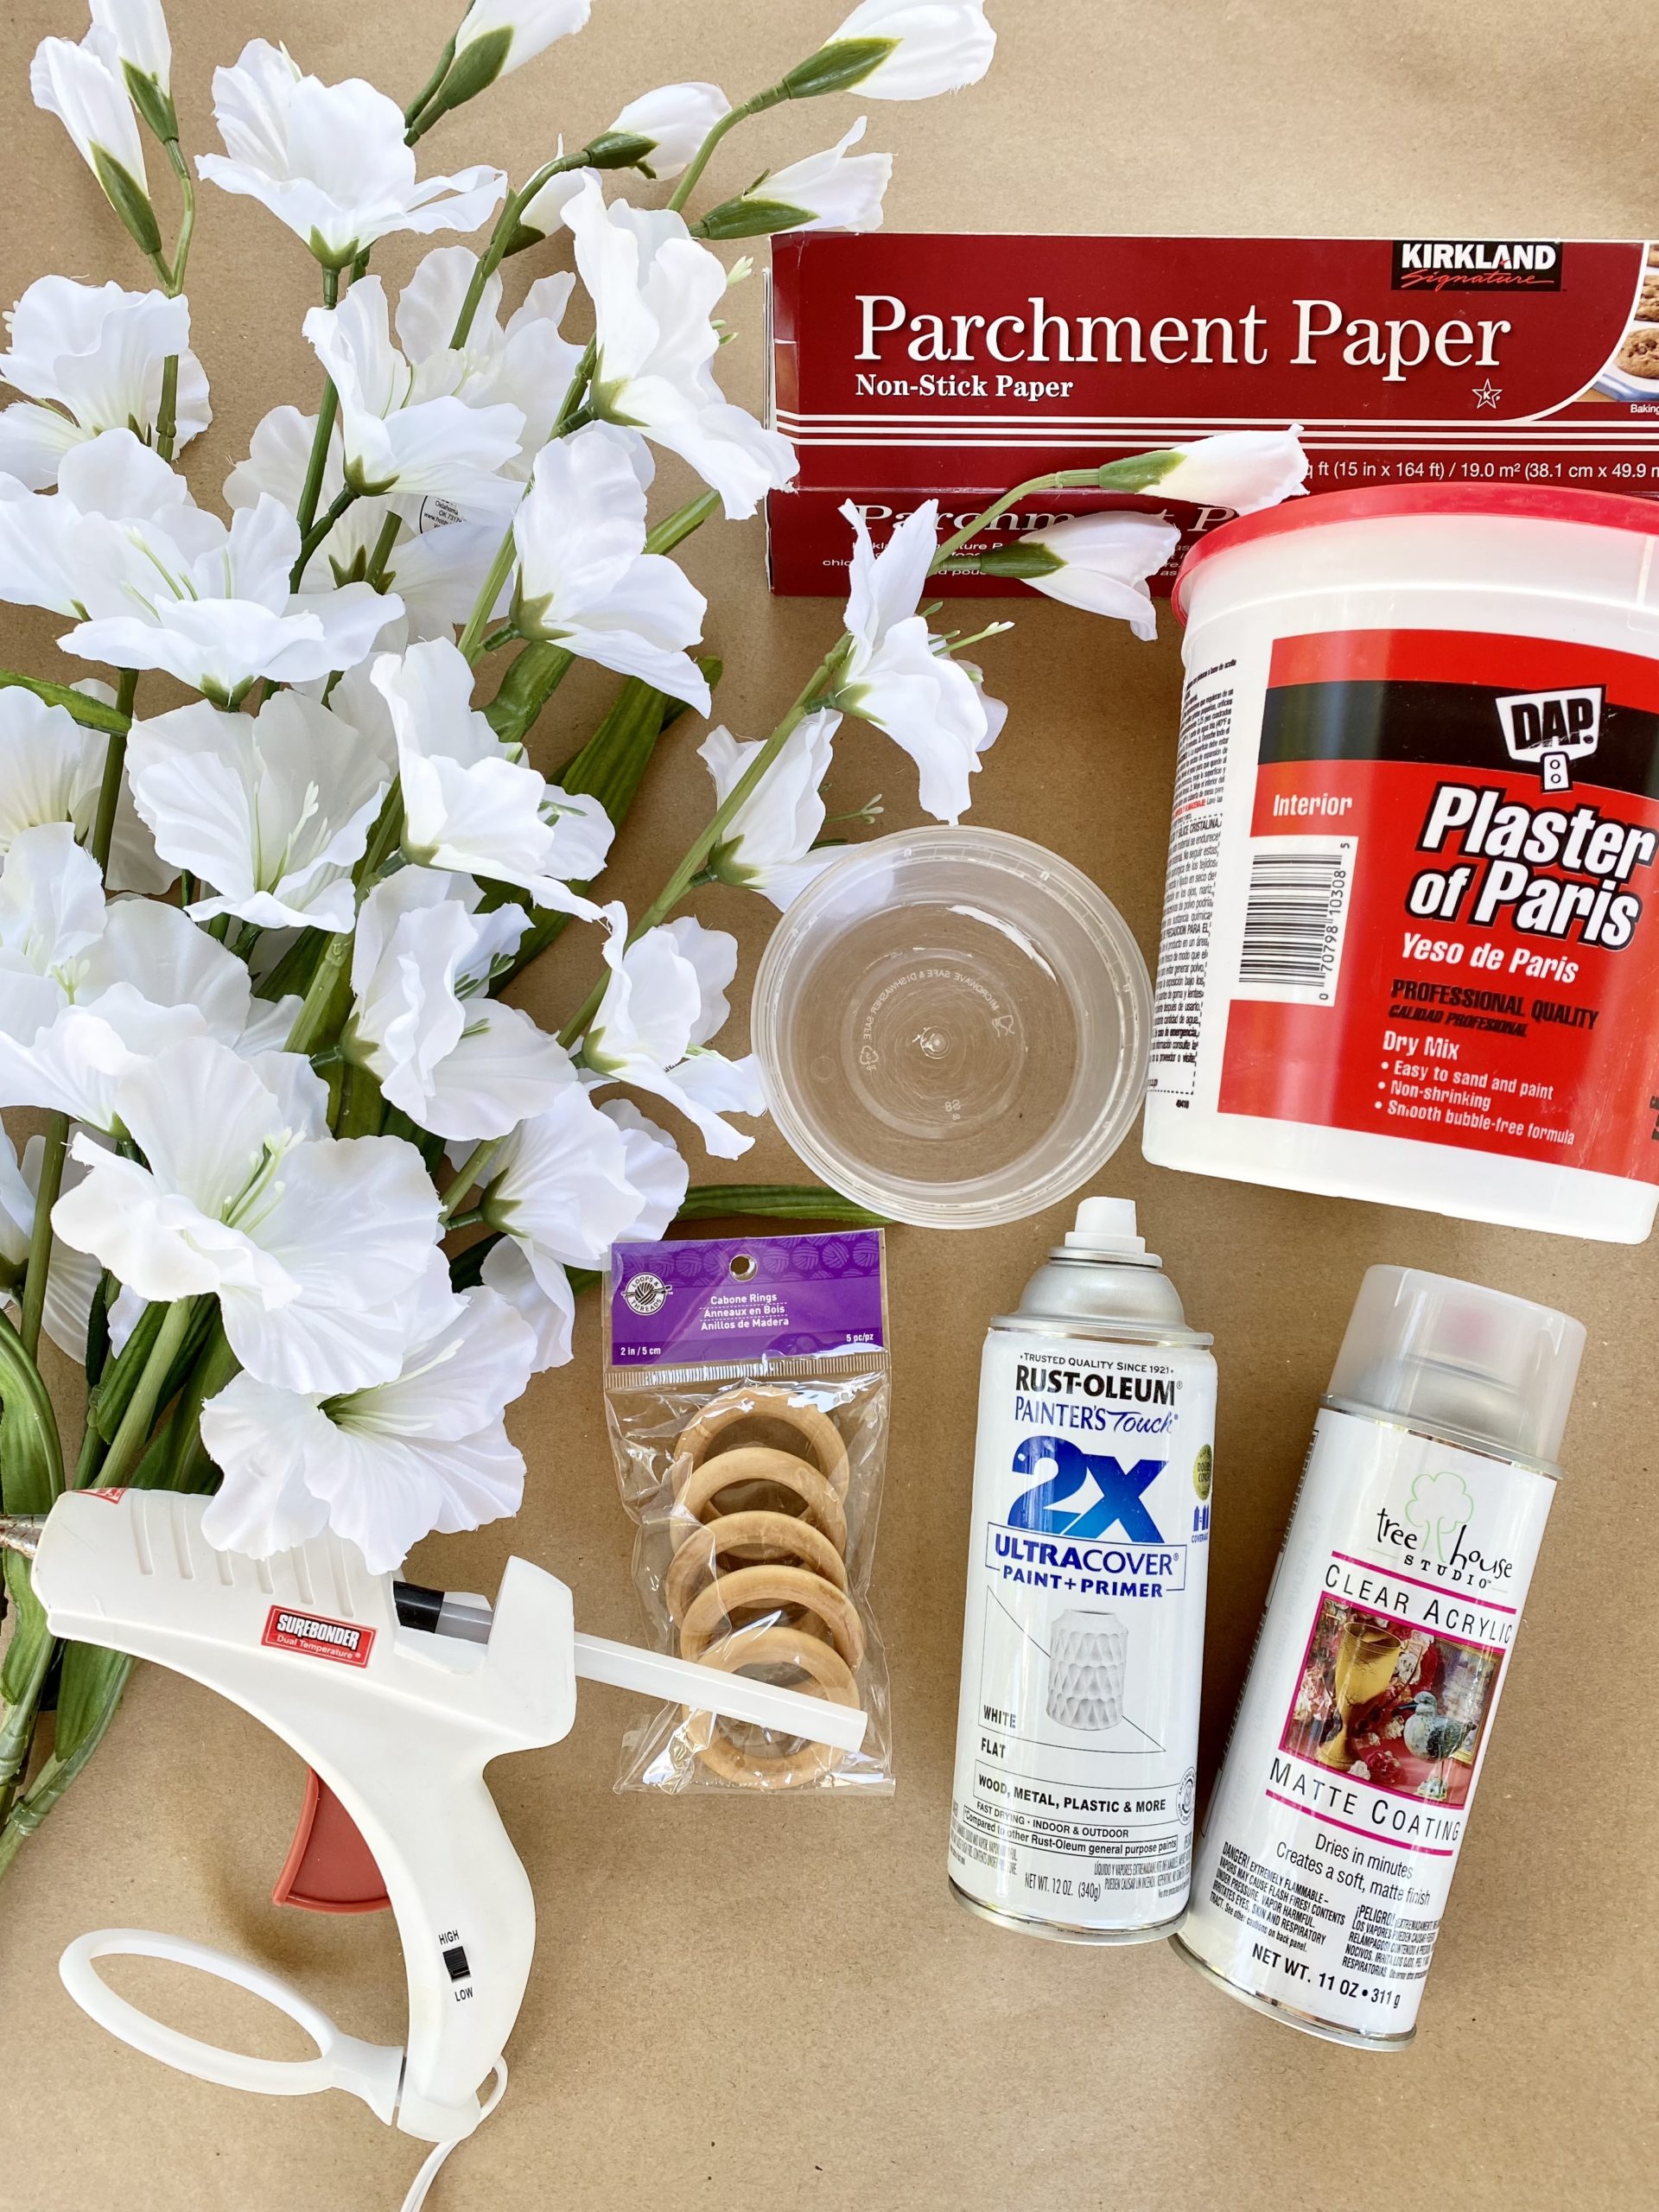 Items needed to make plaster of paris floral napkin rings including faux flowers, plaster of paris, hot glue gun, napkin rings, parchment paper, a bowl, and spray paint.